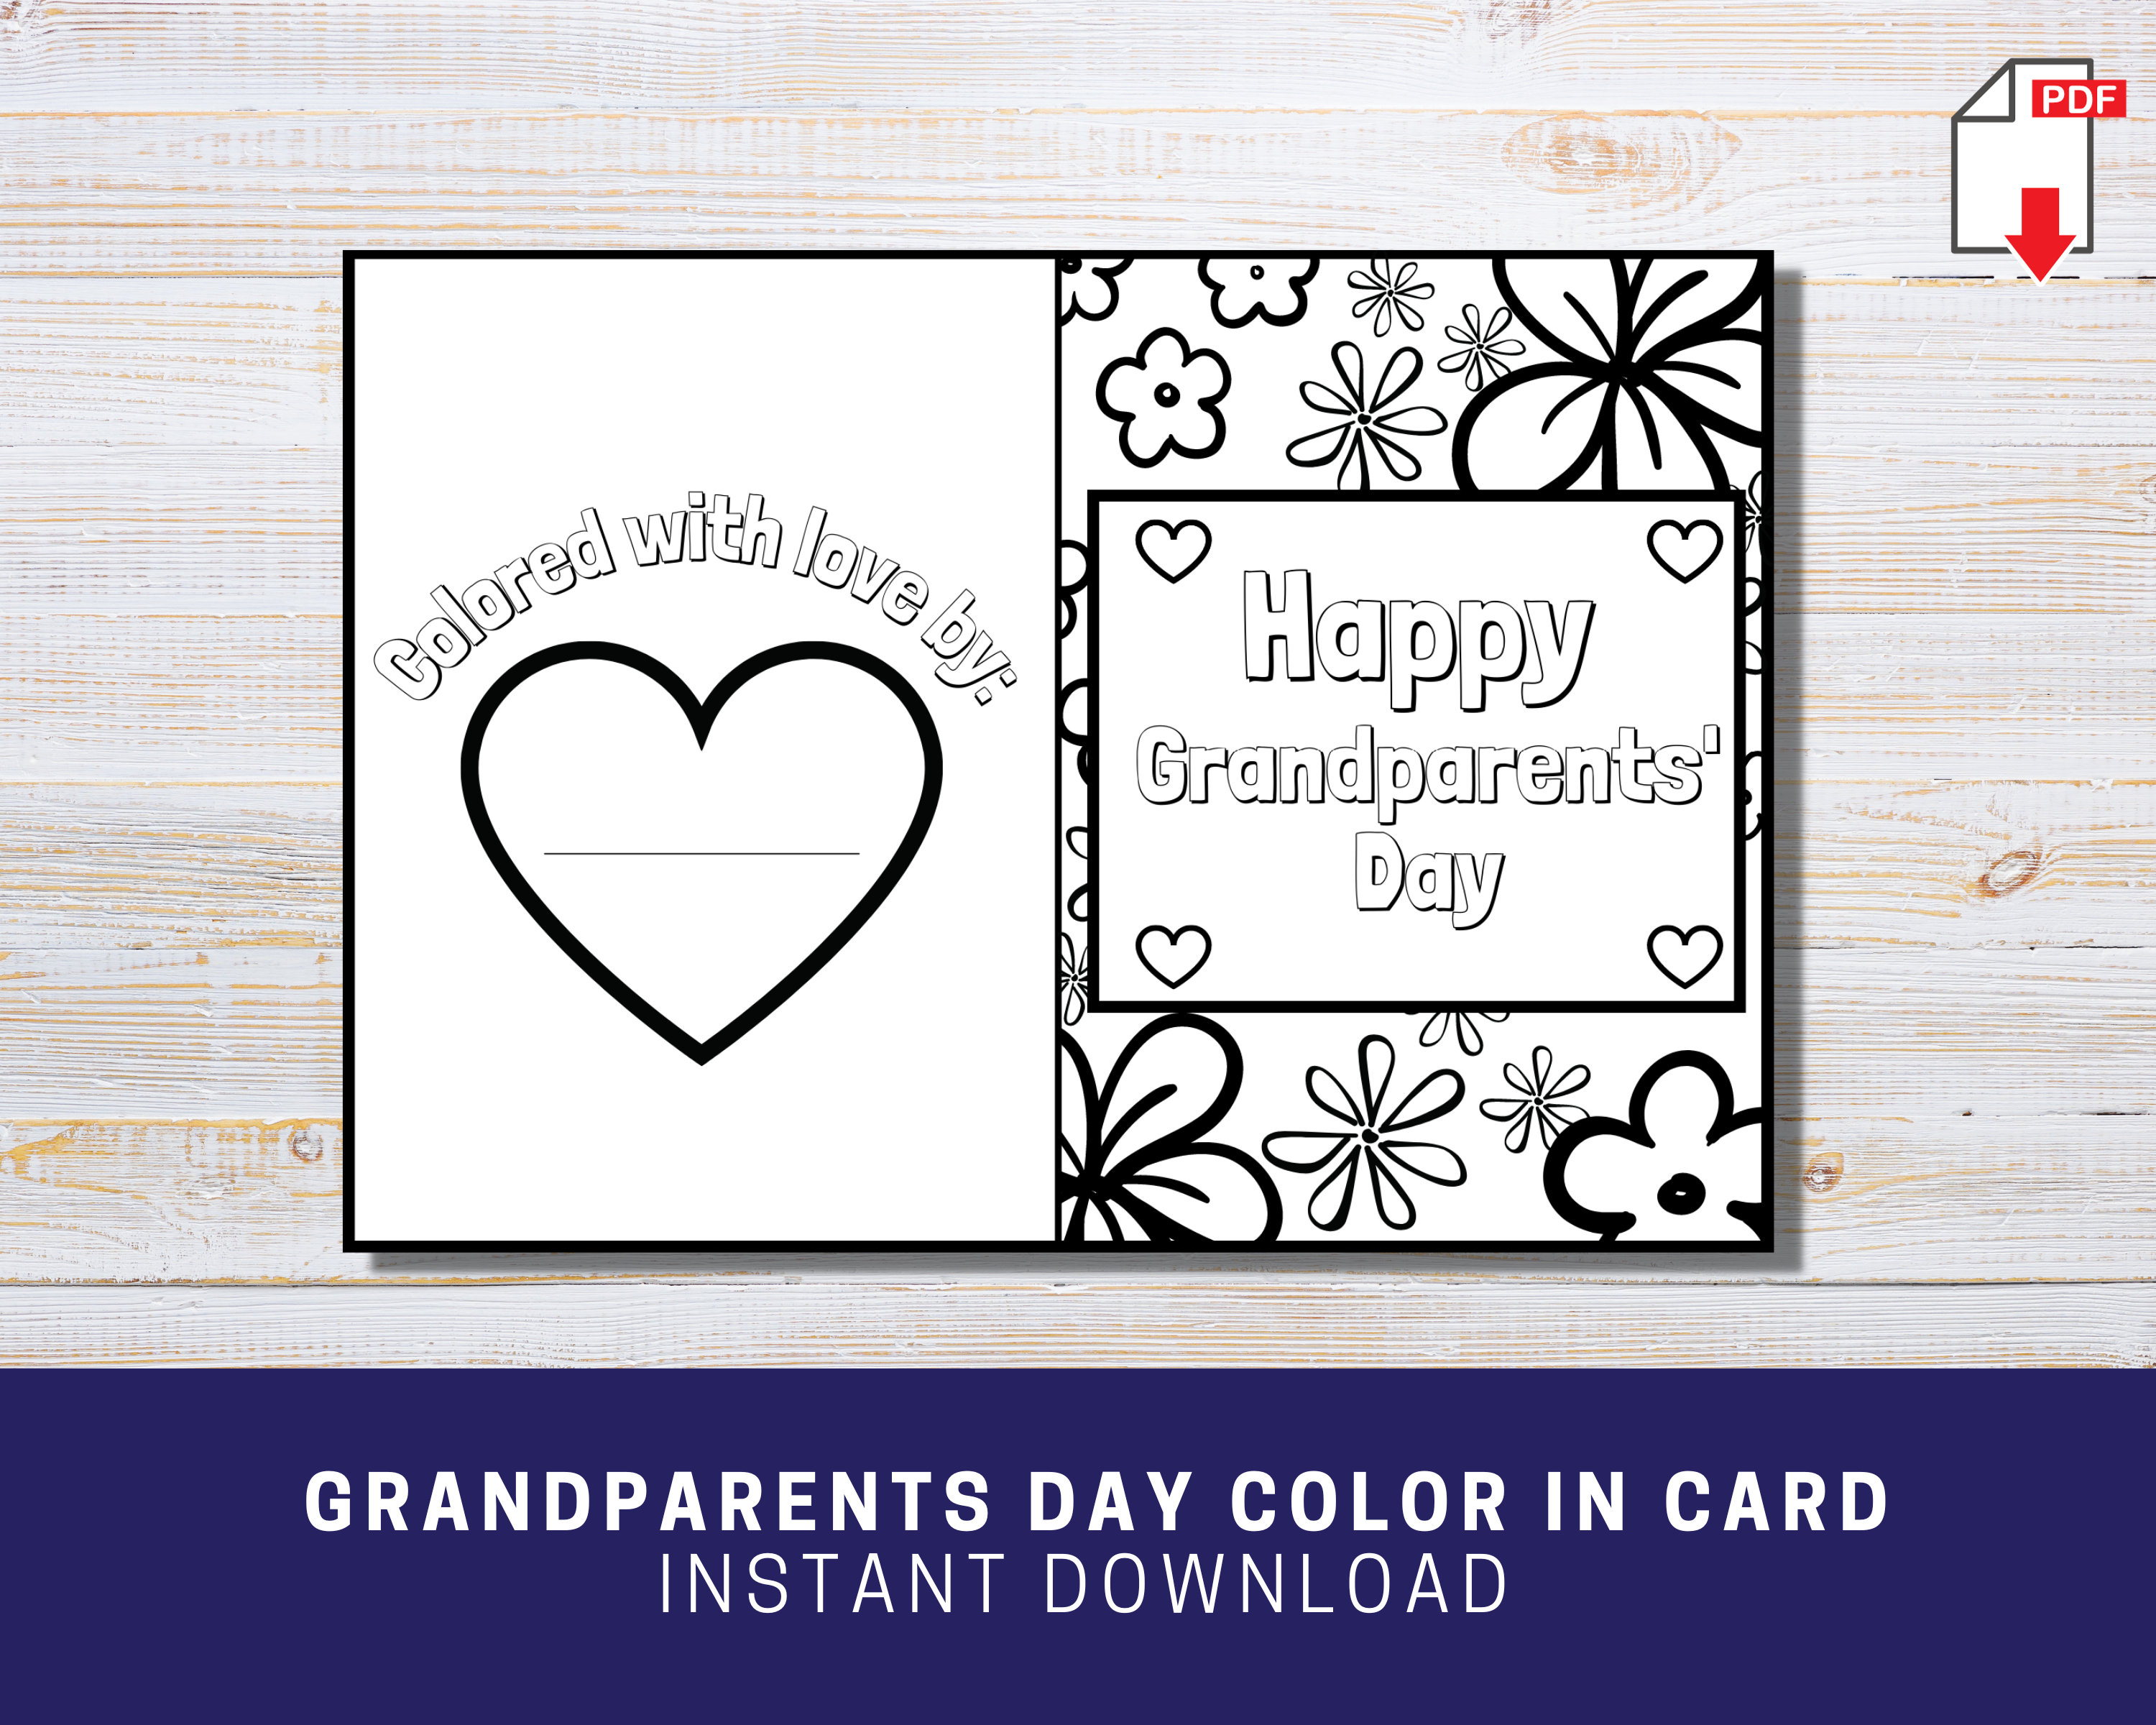 Printable grandparents day color in card grandparents day craft activity for kids and toddlers grandparents day keepsake instant download